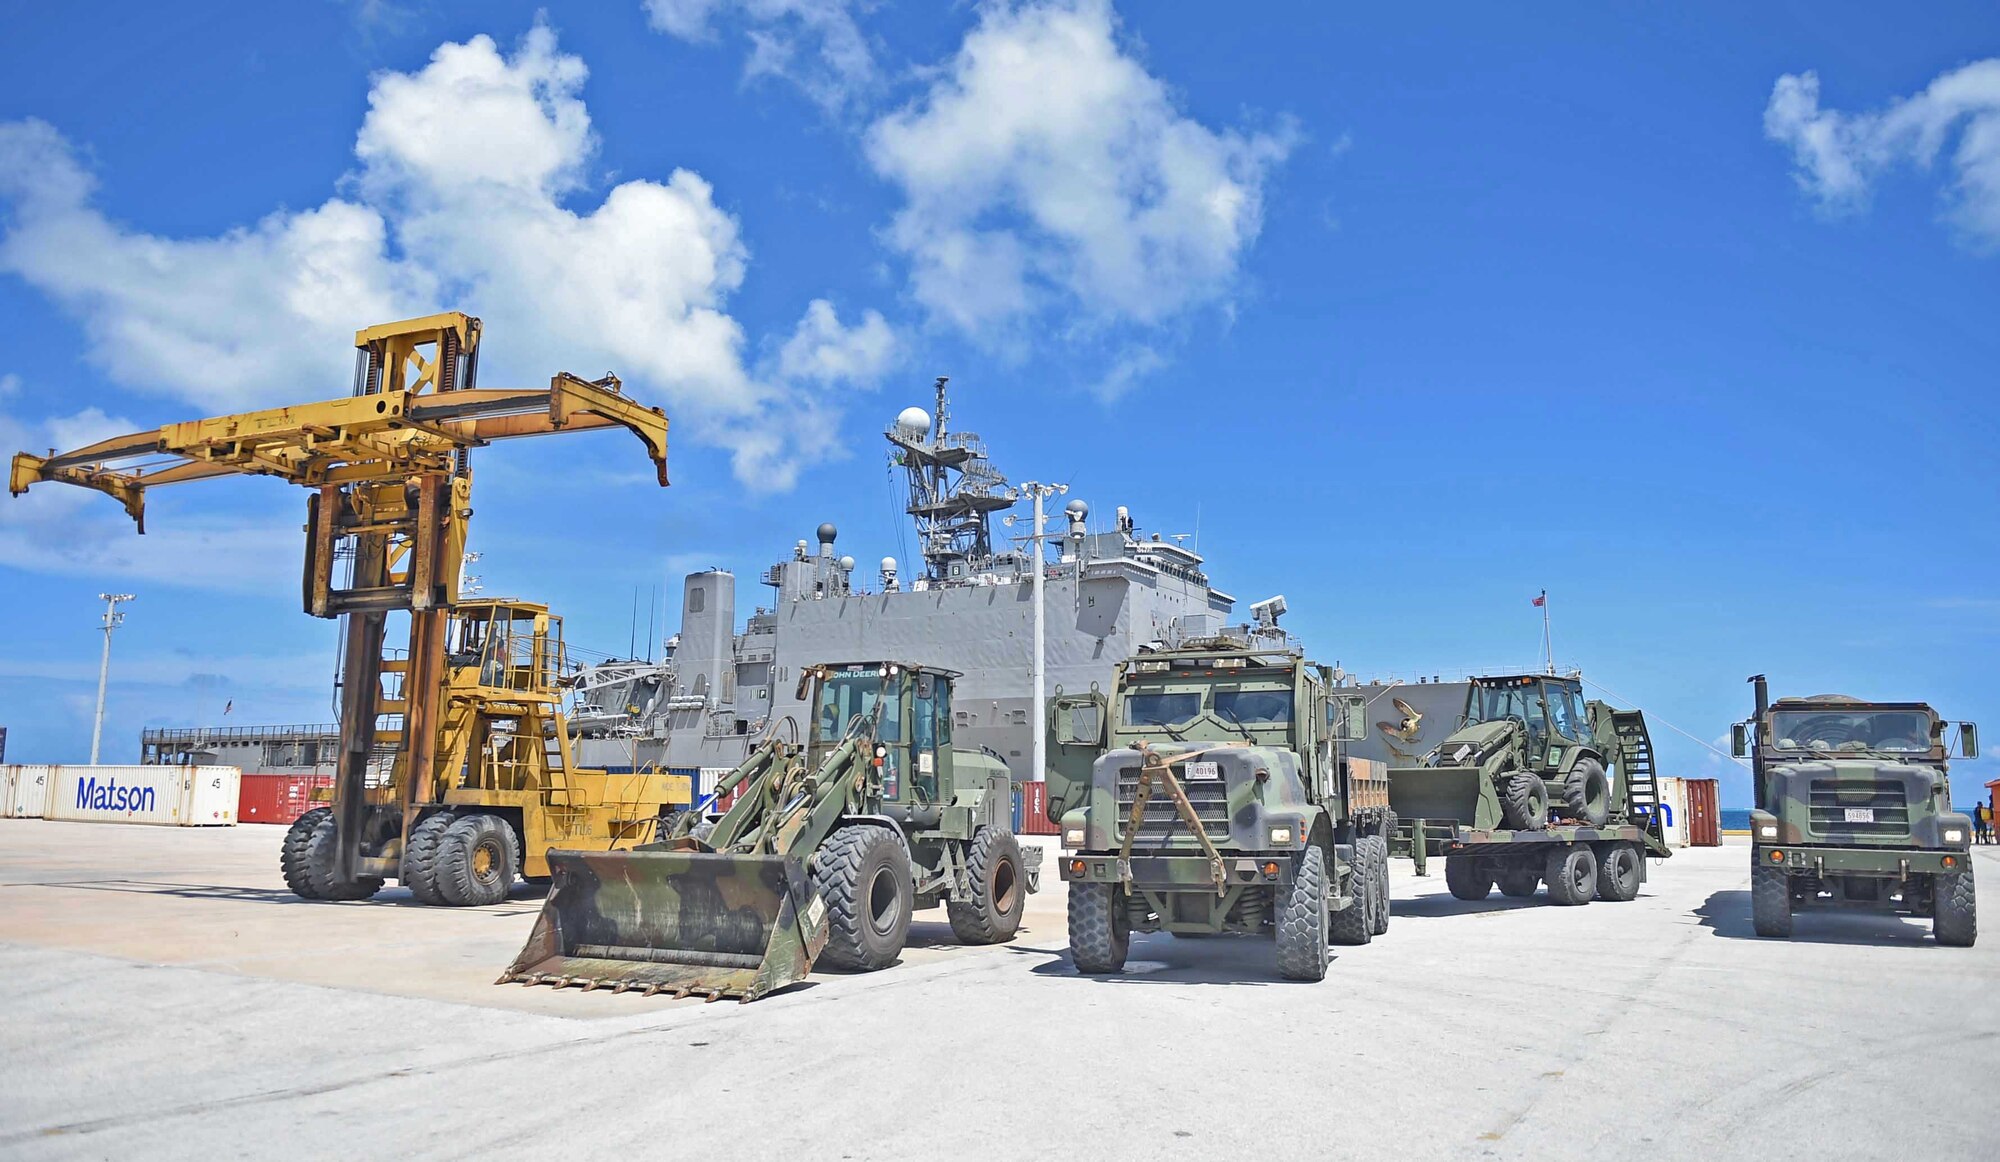 150812-N-KM939-099
SAIPAN HARBOR, Saipan (Aug. 12, 2015) - Marines from the 31st Marine Expeditionary Unit (MEU) stage vehicles in front of the amphibious dock landing ship USS Ashland (LSD 48), during disaster relief efforts in Saipan after Typhoon Soudelor. 31st MEU are embarked on the amphibious dock landing ship USS Ashland (LSD 48) and are on patrol in the U.S. 7th Fleet area of operations. (U.S. Navy photo by Mass Communication Specialist 3rd Class David A. Cox/Released)